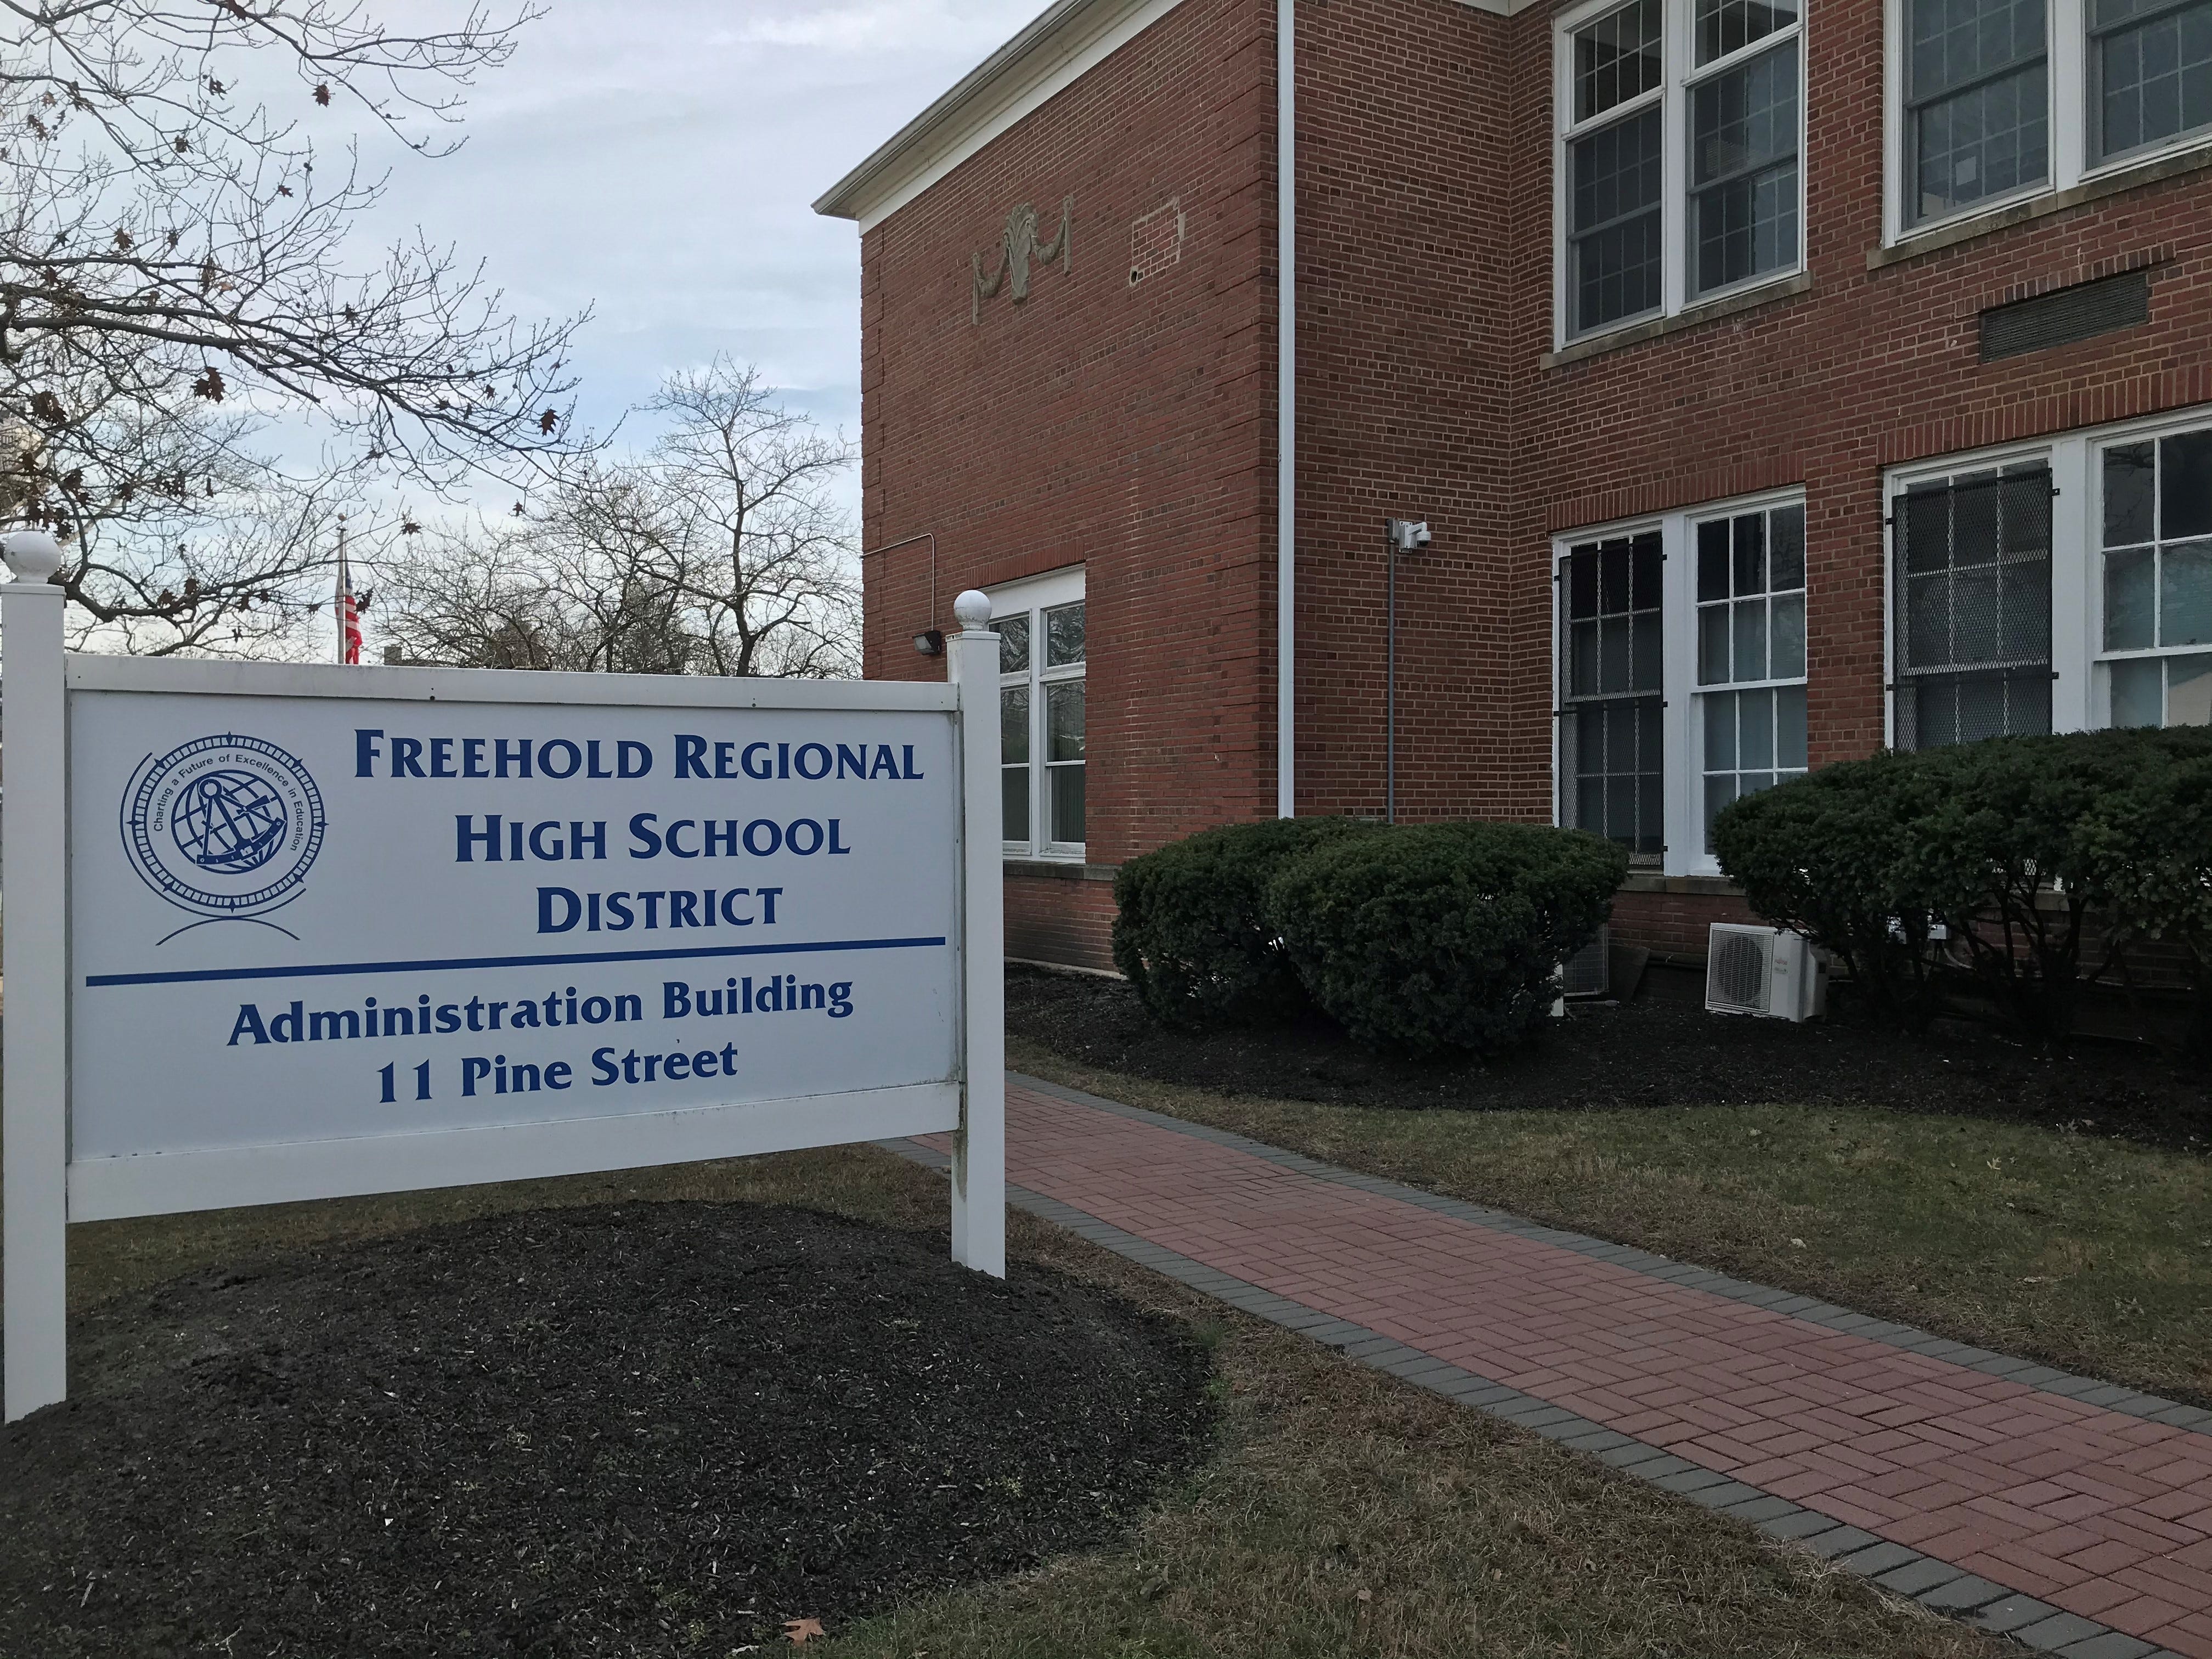 list the freehold township regional high schools and their progam